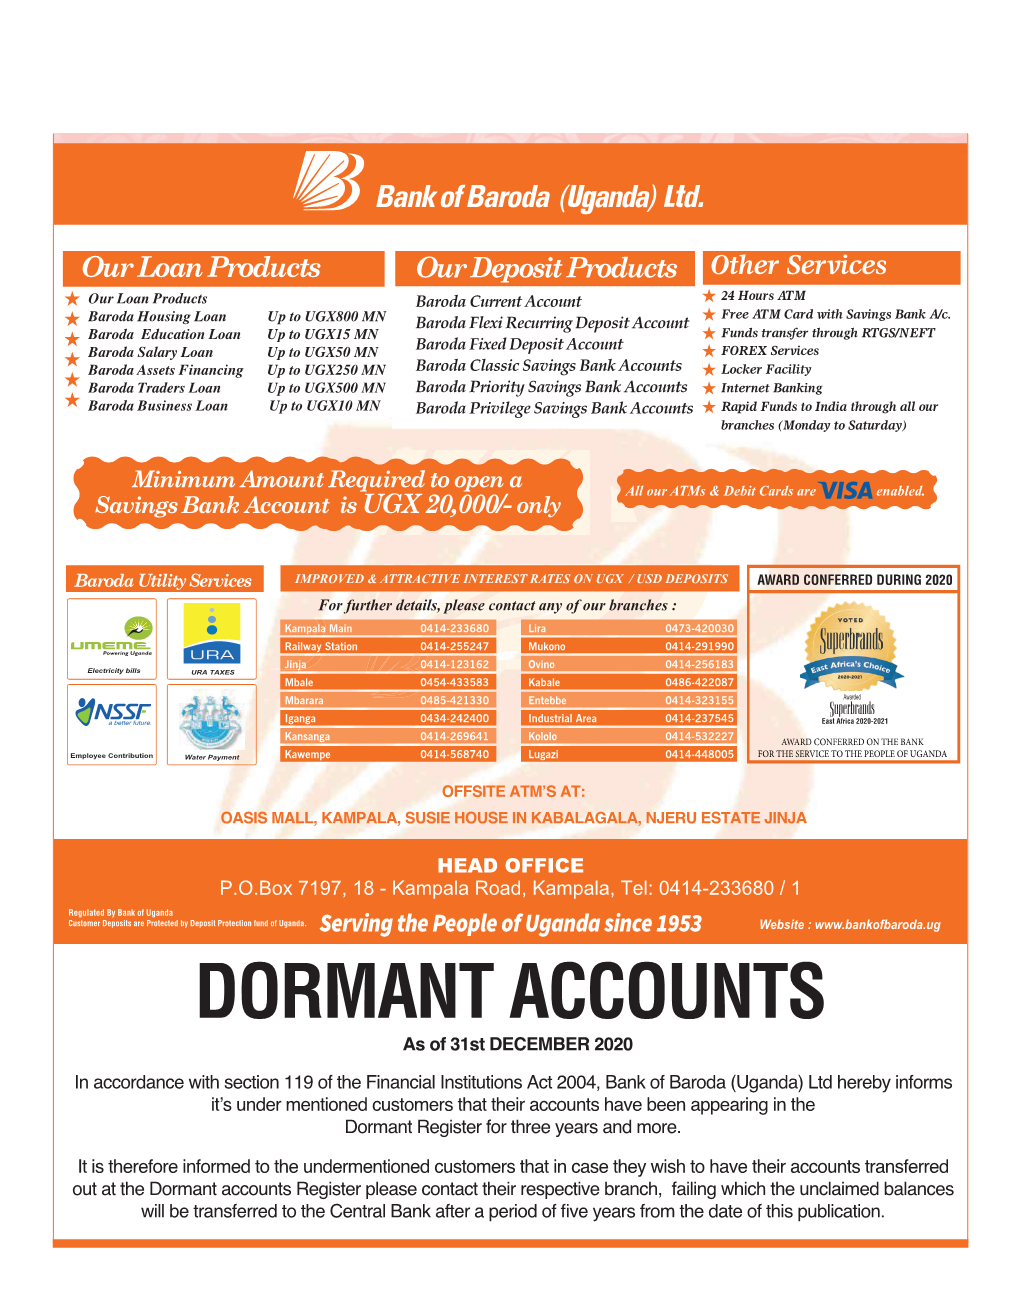 DORMANT ACCOUNTS As of 31St DECEMBER 2020